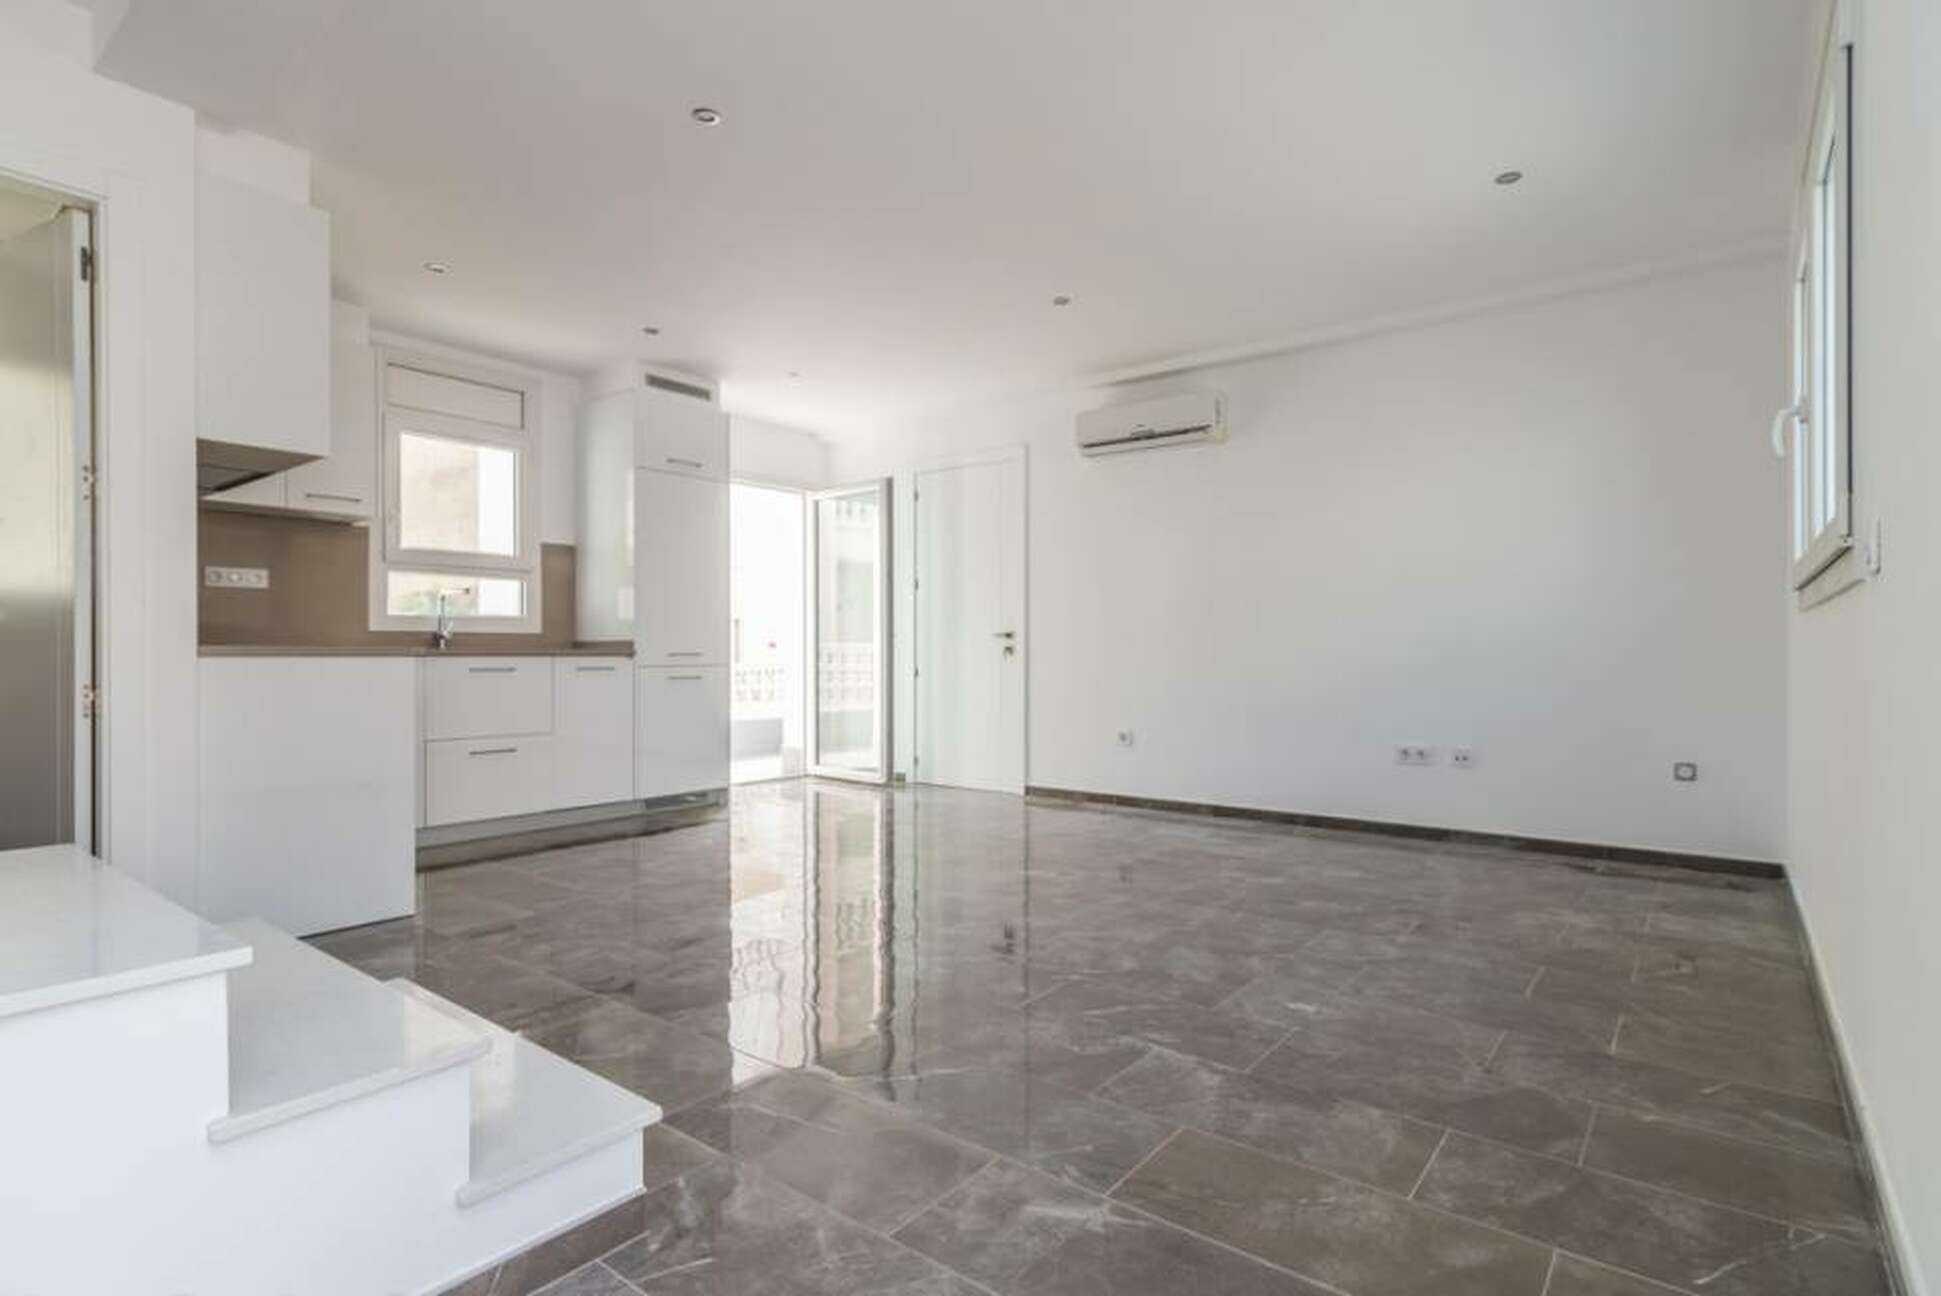 Beautiful new modern style house for sale in Empuriabrava